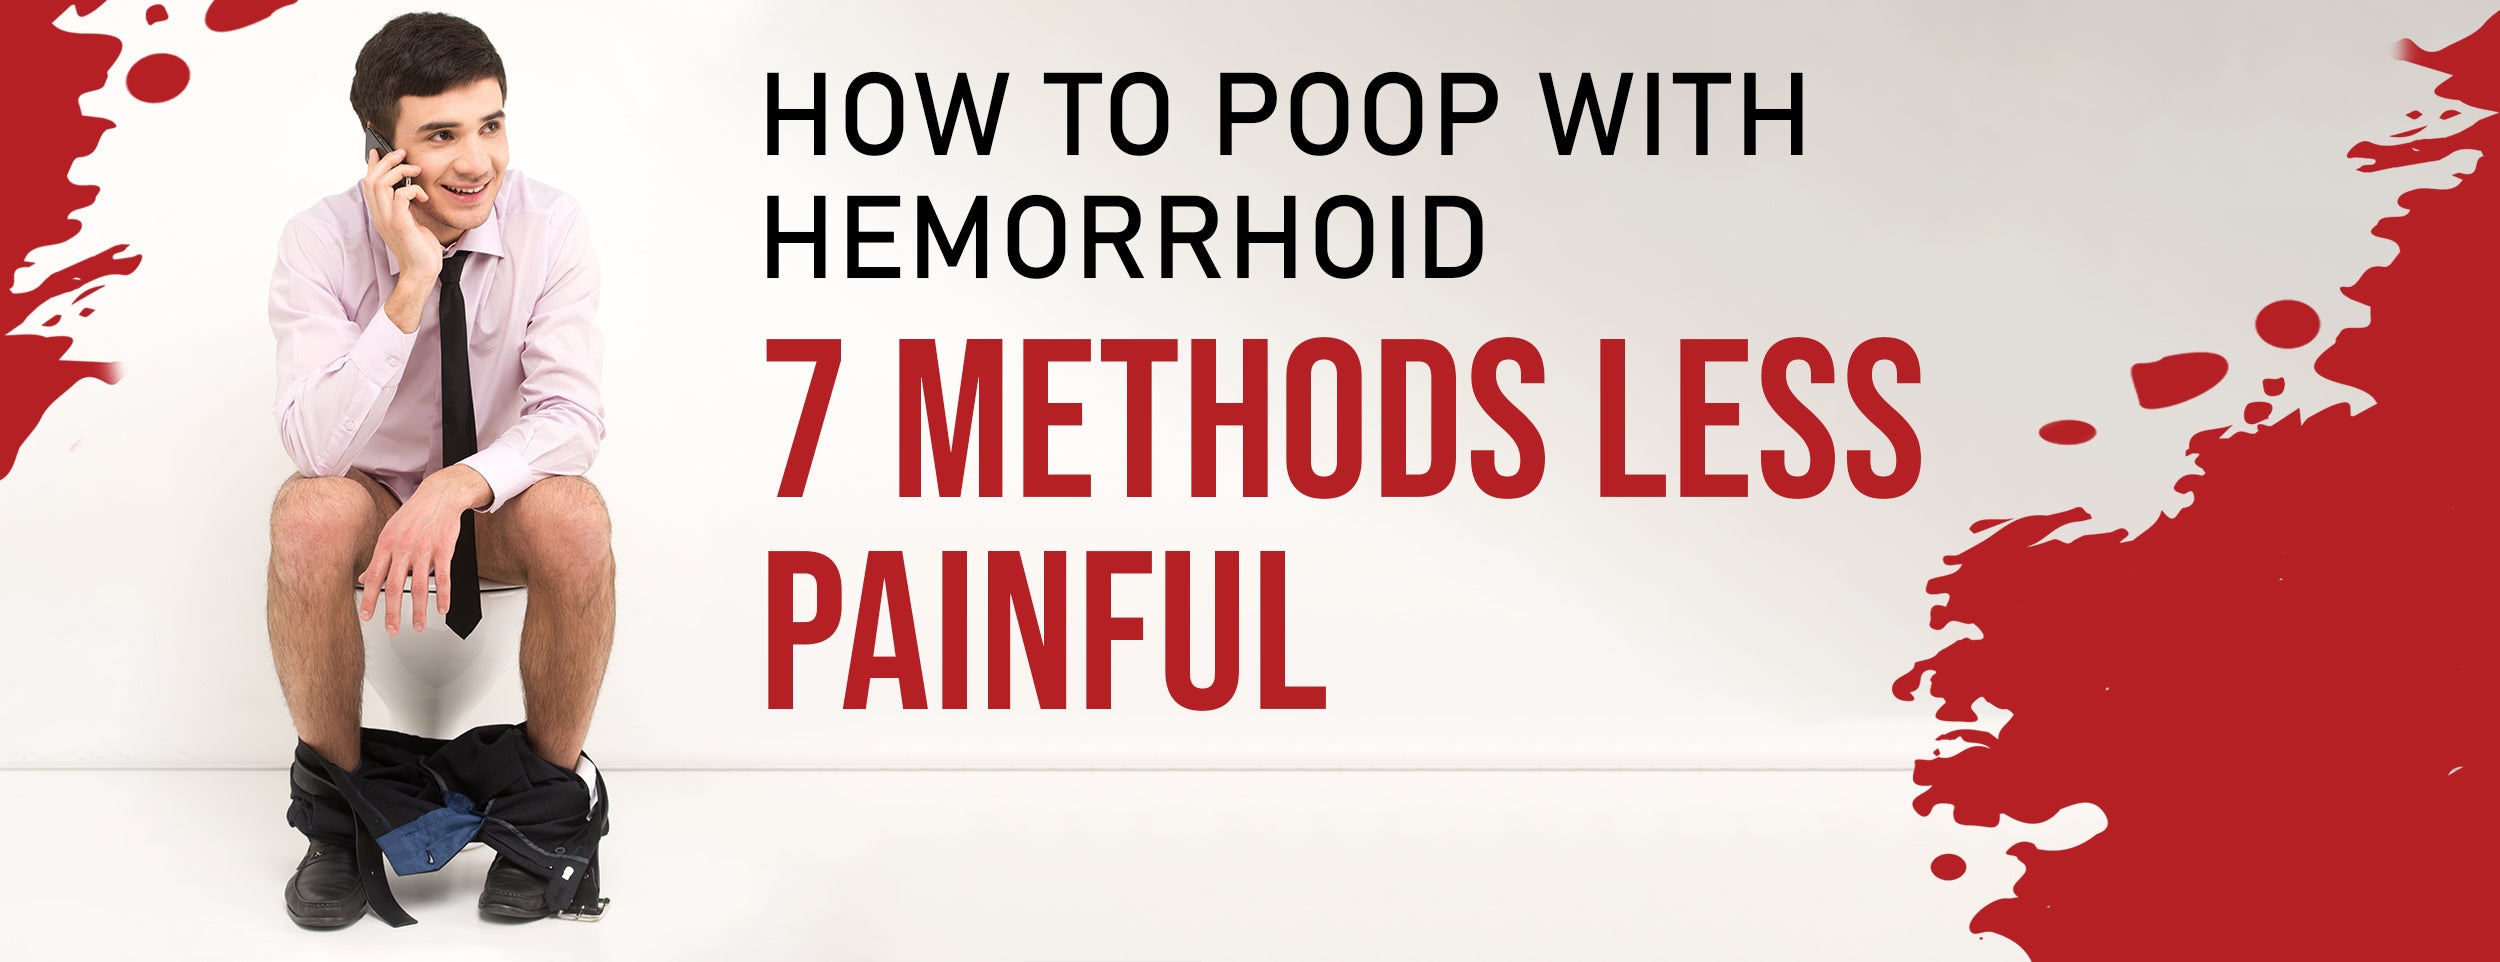 Methods of Pooping with Hemorrhoids [Less Painful]